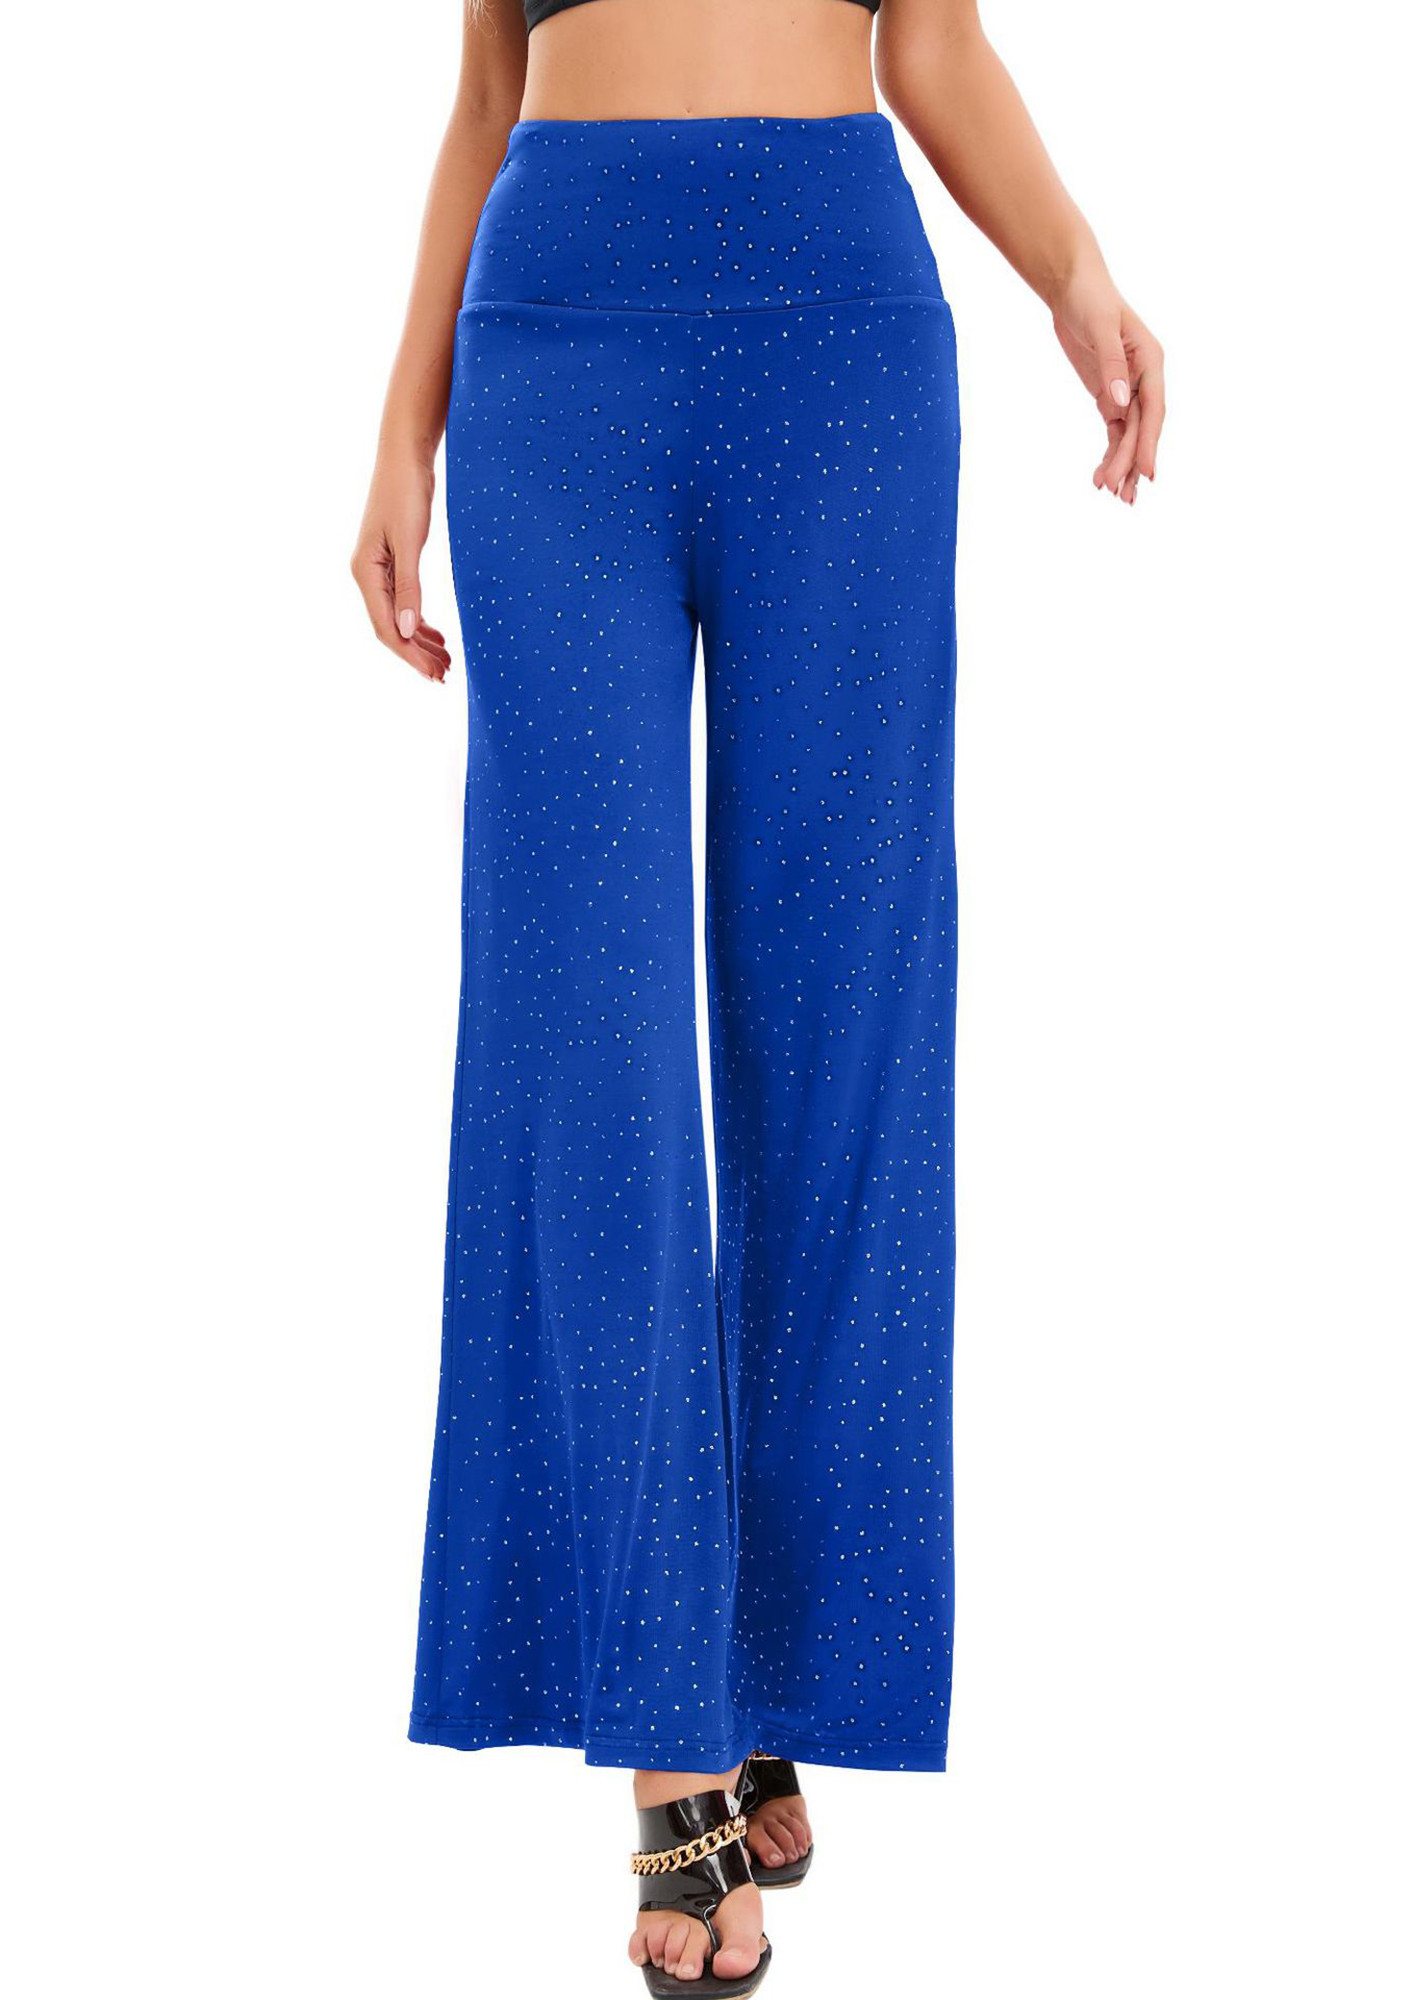 Royal Blue Wide Leg Pants  Made in South Africa  Equilibrio